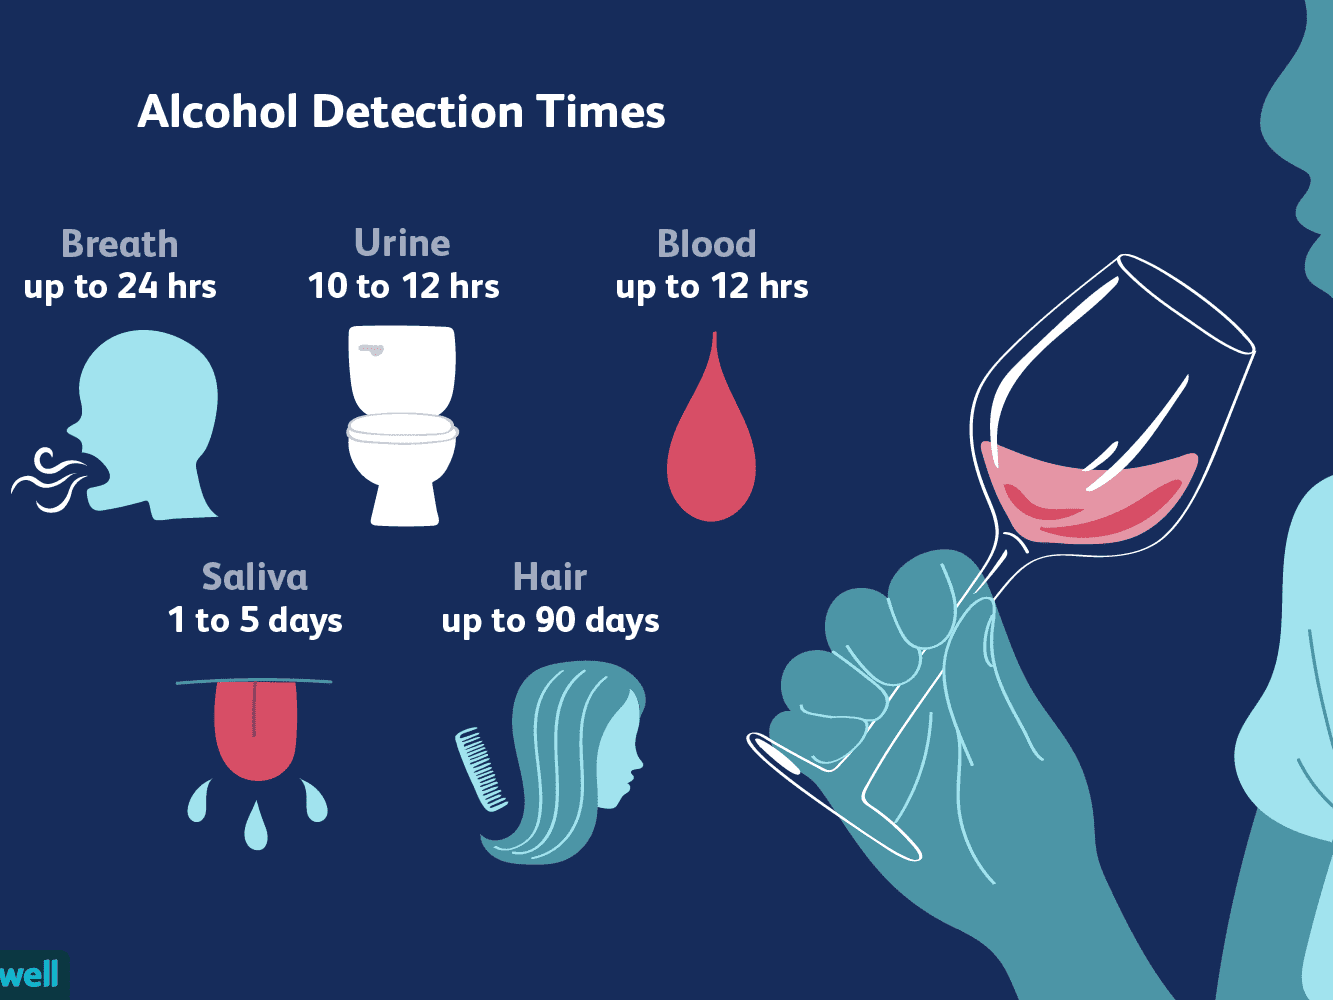 How Long Does it Take Alcohol to Leave Your System